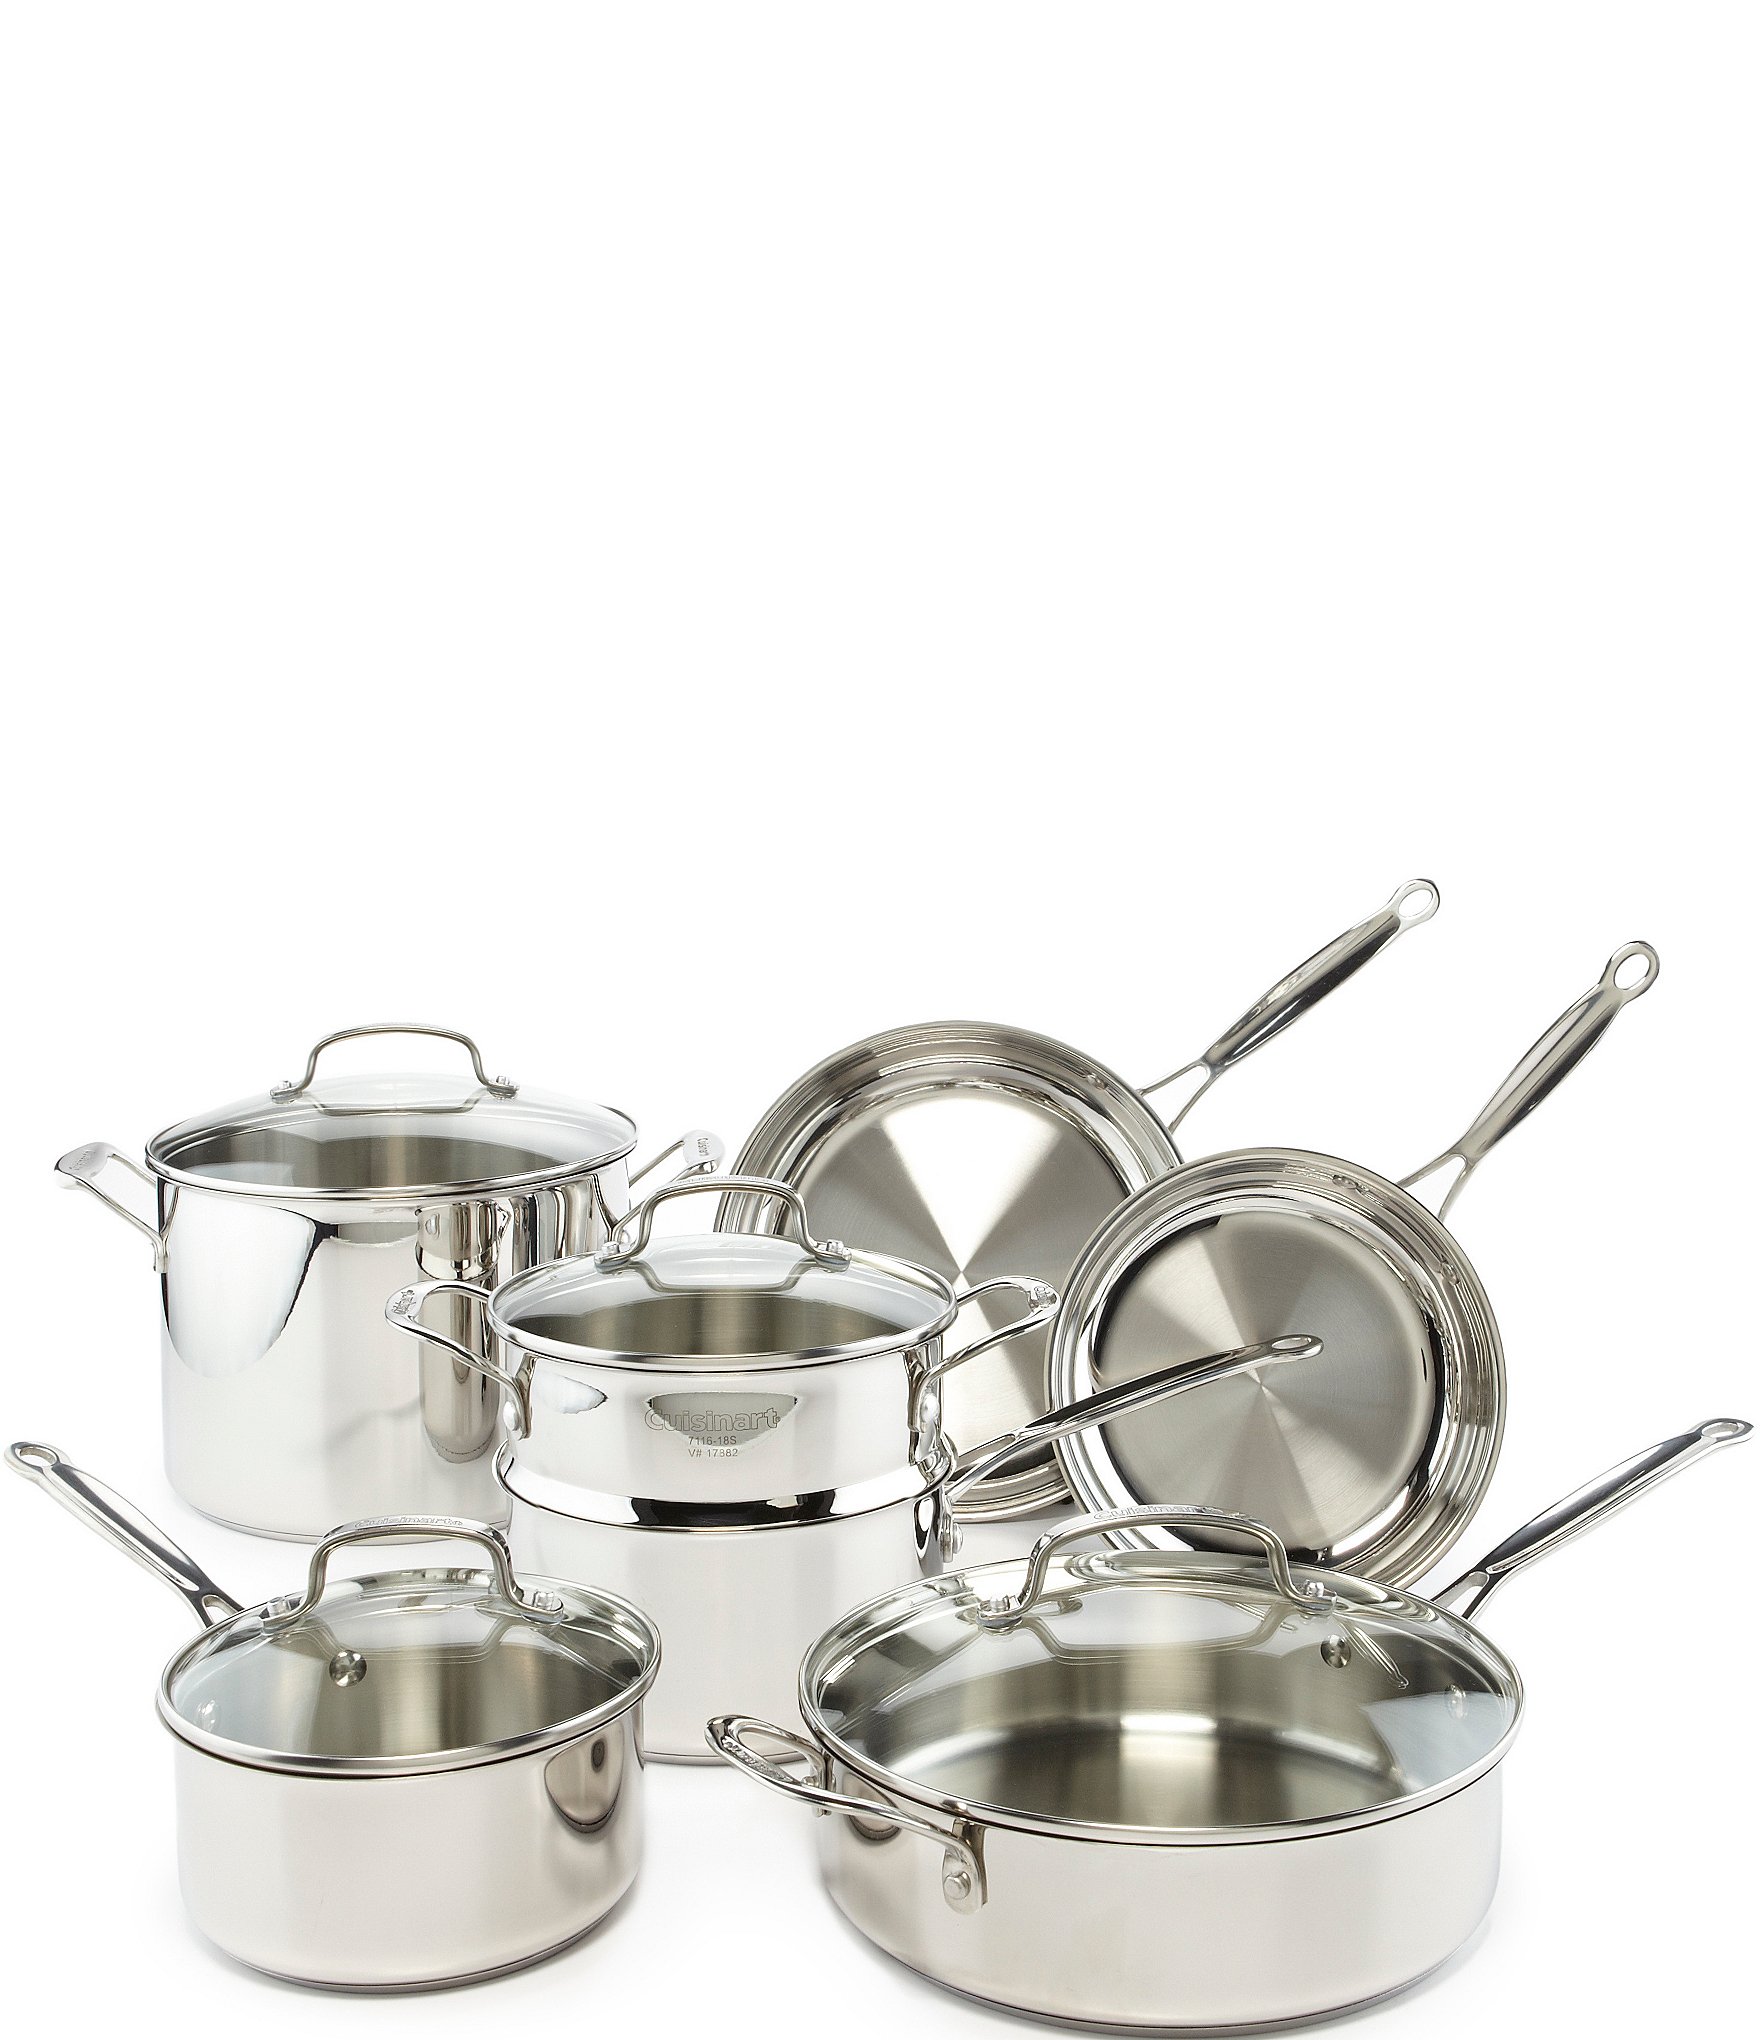 Cuisinart Chef's Classic Stainless Steel 11-Piece Cookware Set | Dillards Cuisinart Stainless Steel Pot Set